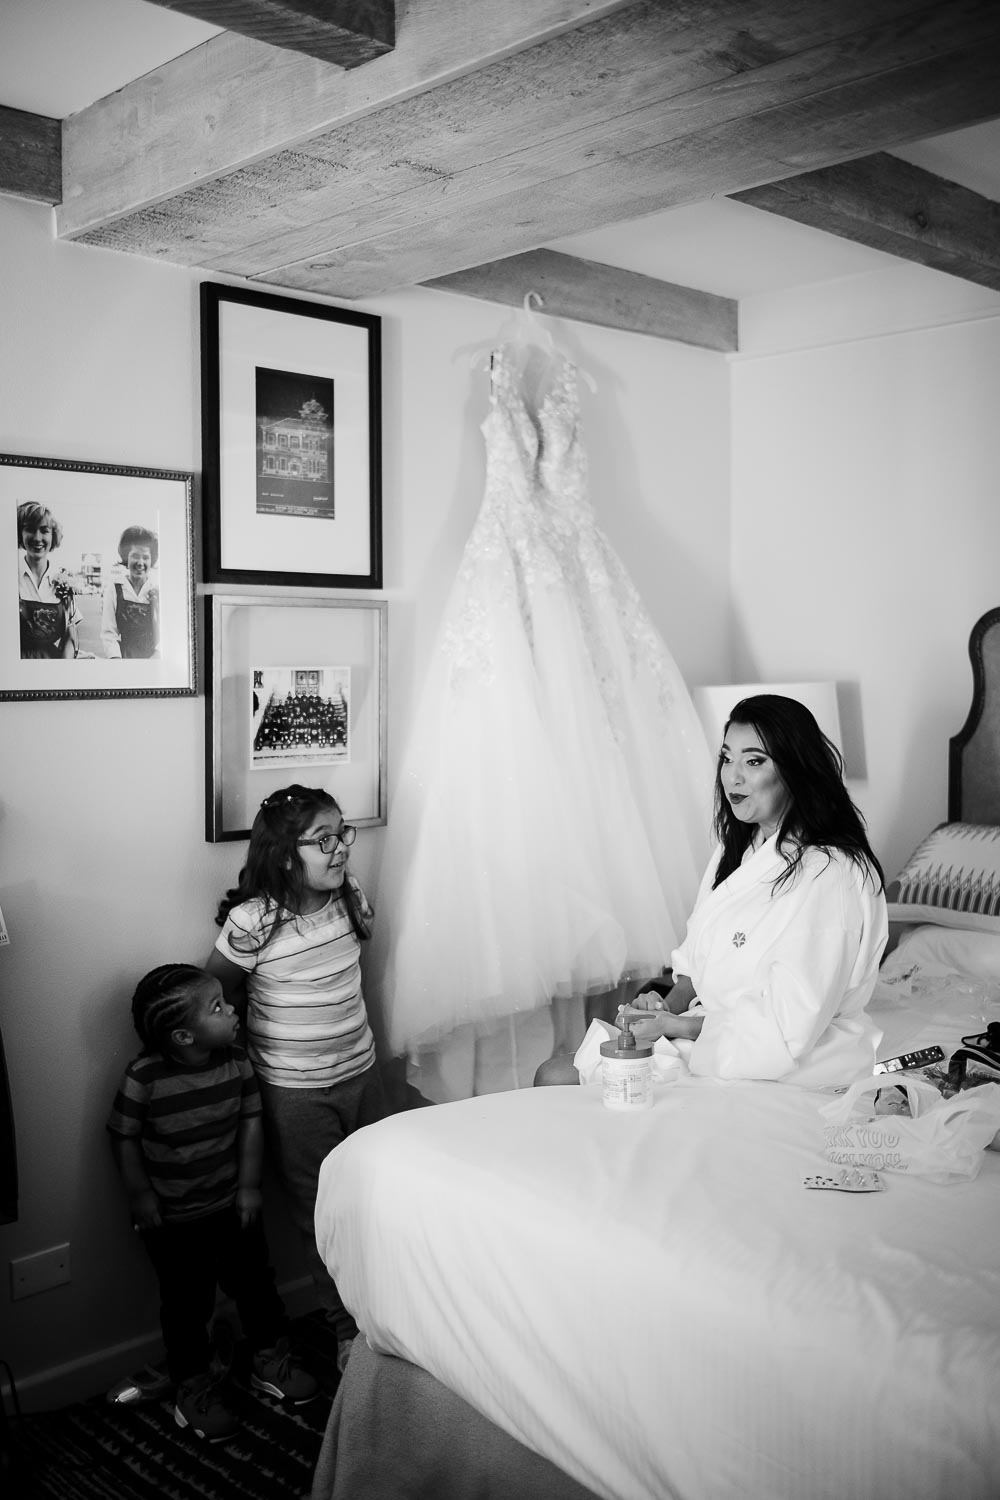 Bride sits on bed with wedding dress hanging bejind her as ring beaer and flower girl look at bride